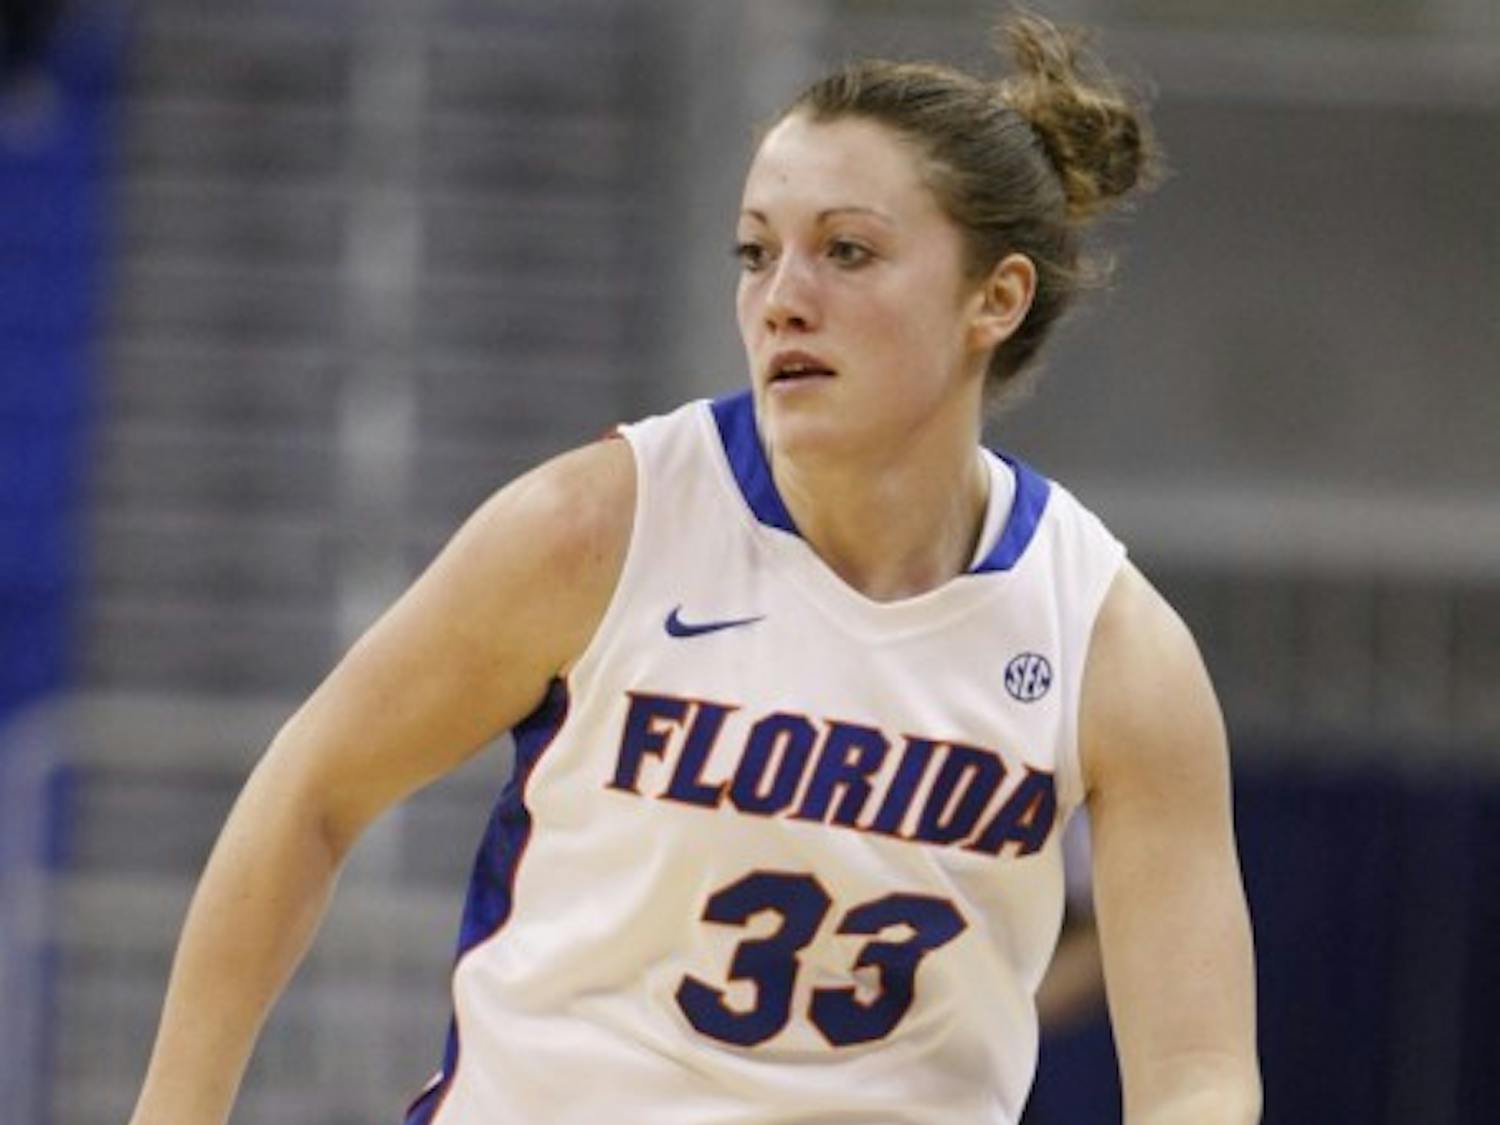 Florida senior guard Jordan Jones is setting career-highs in points per game and shooting percentage, but she has been slumping of late.